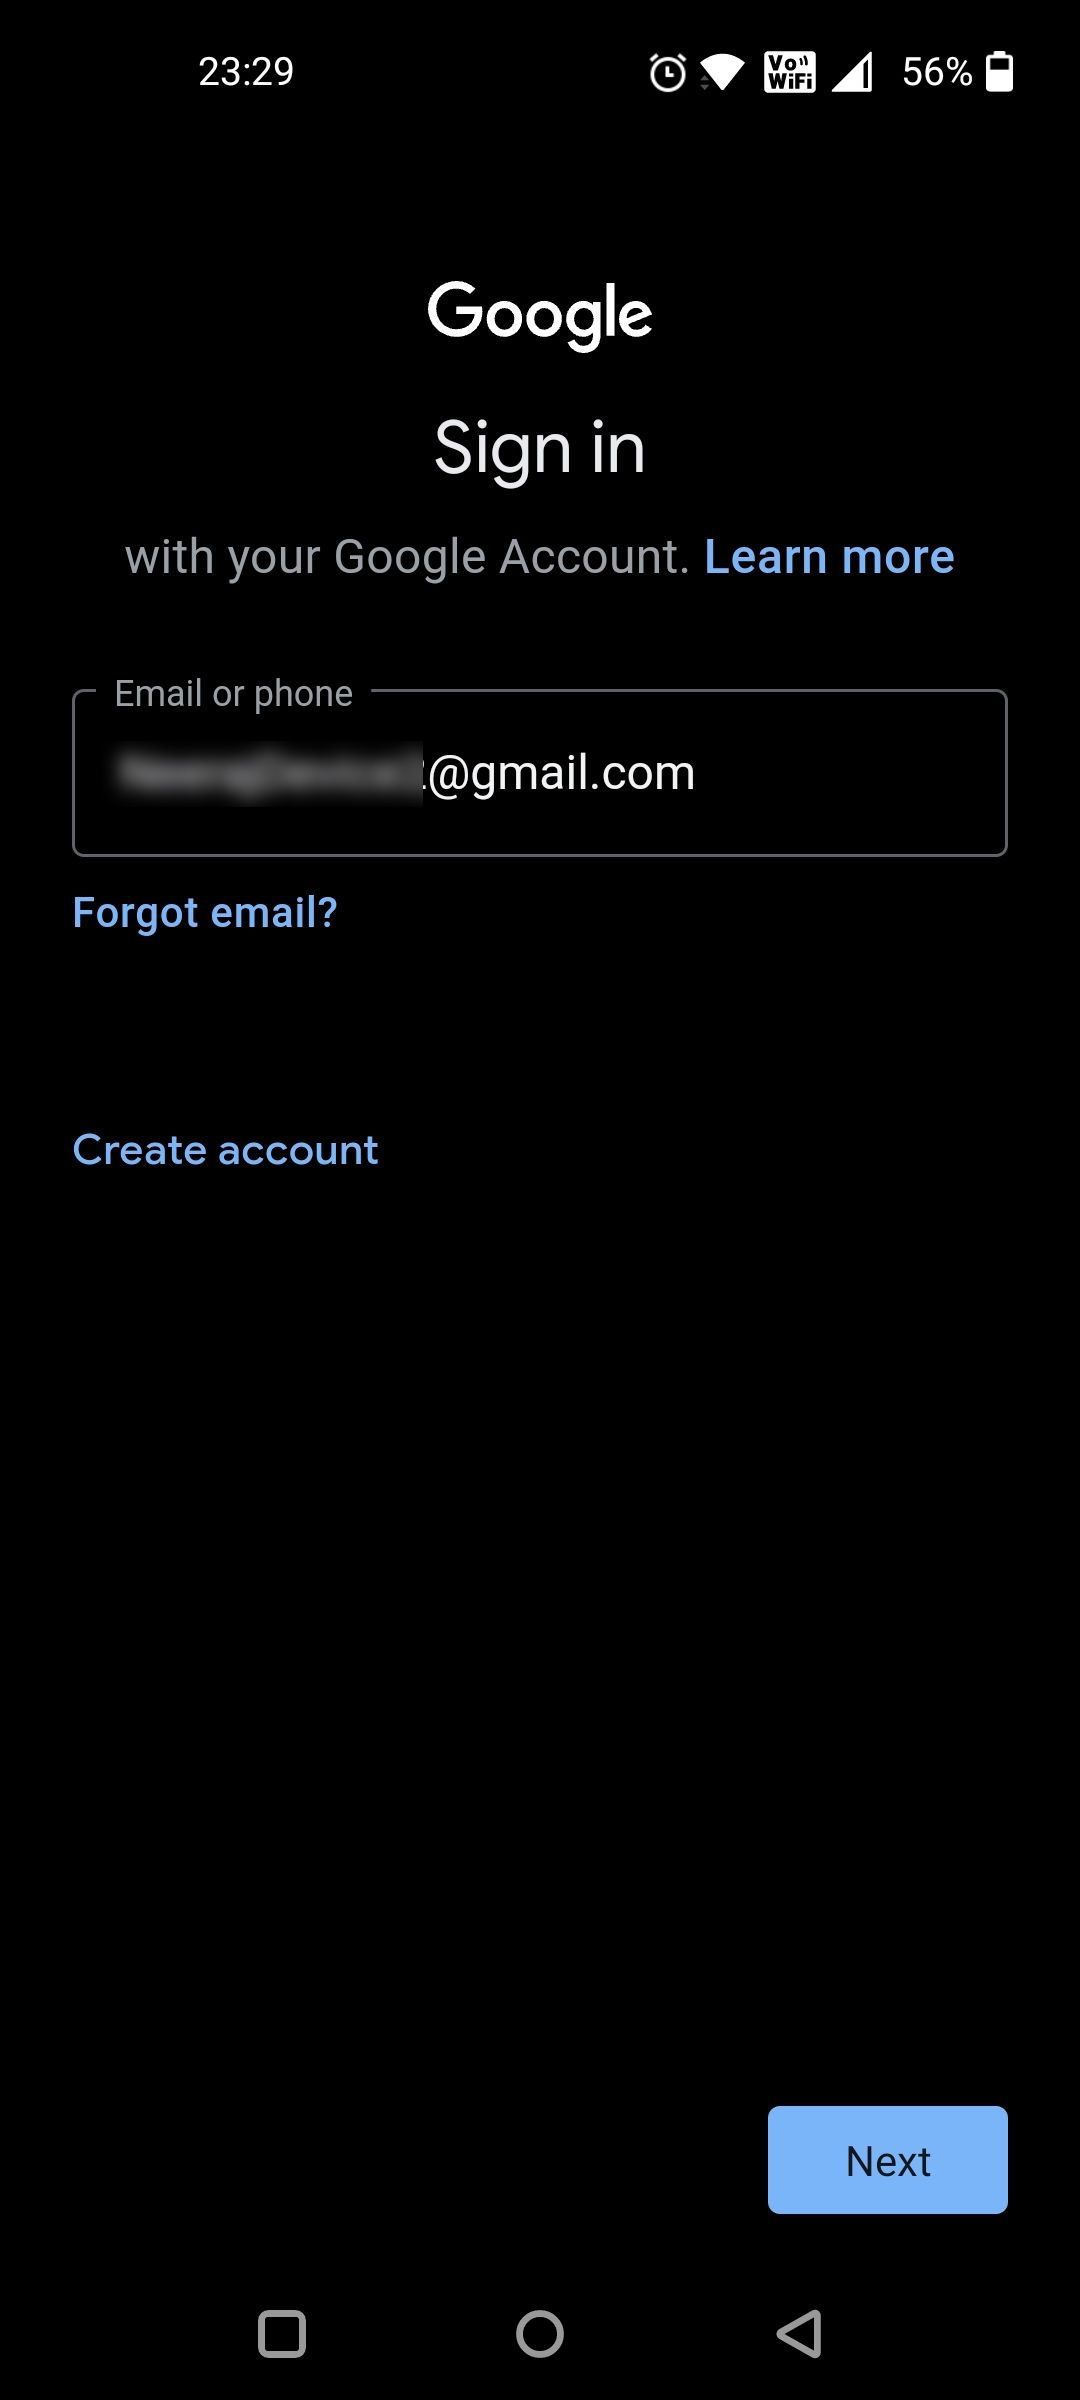 Sign In with Gmail of New Device